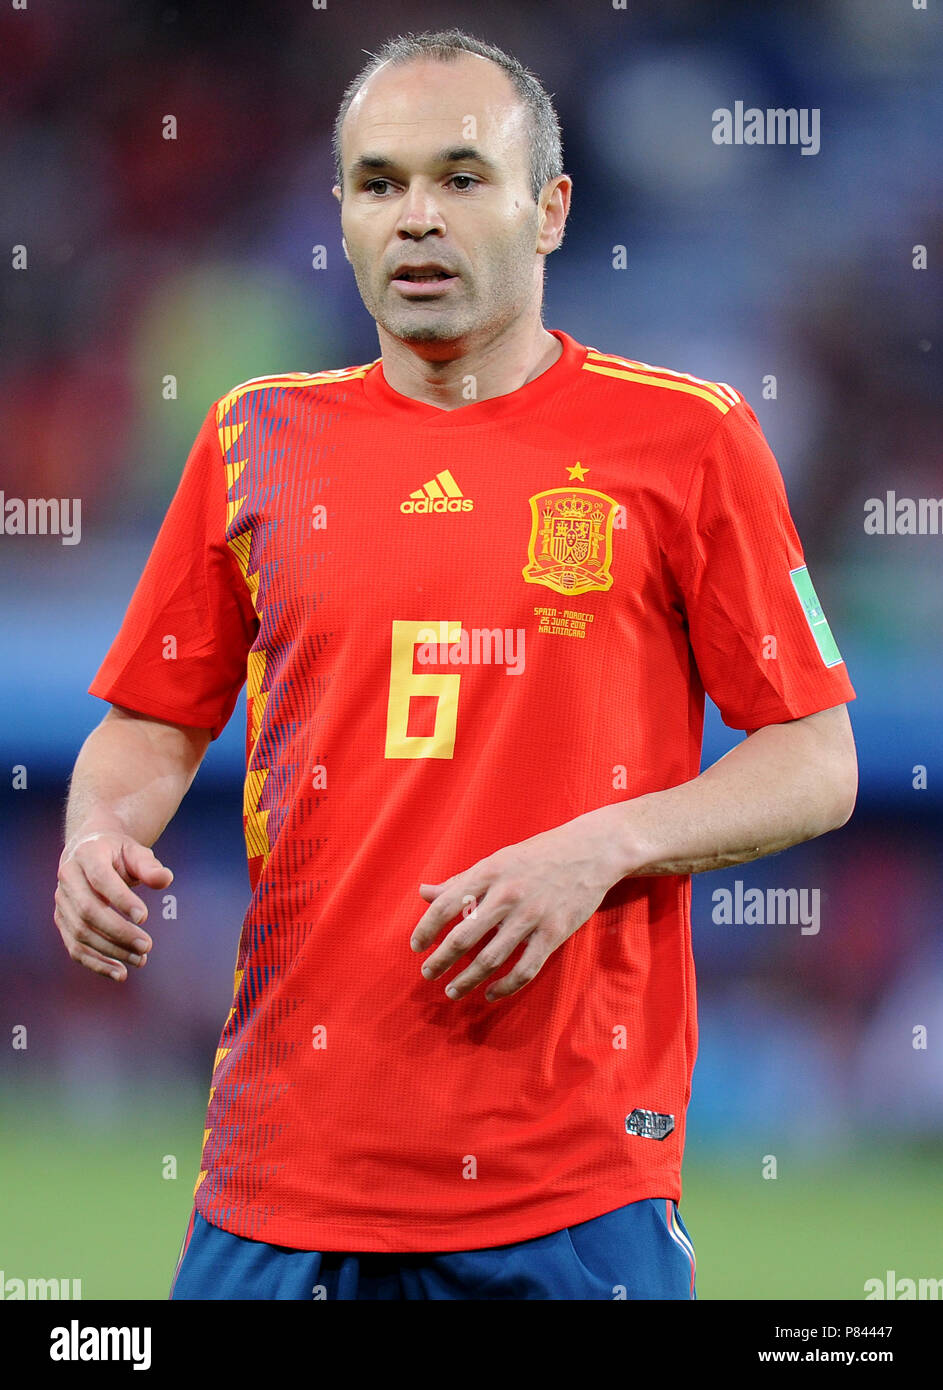 KALININGRAD, RUSSIA - JUNE 25: Andres Iniesta of Spain looks on during the 2018 FIFA World Cup Russia group B match between Spain and Morocco at Kaliningrad Stadium on June 25, 2018 in Kaliningrad, Russia. (Photo by Norbert Barczyk/PressFocus/MB Media) Stock Photo